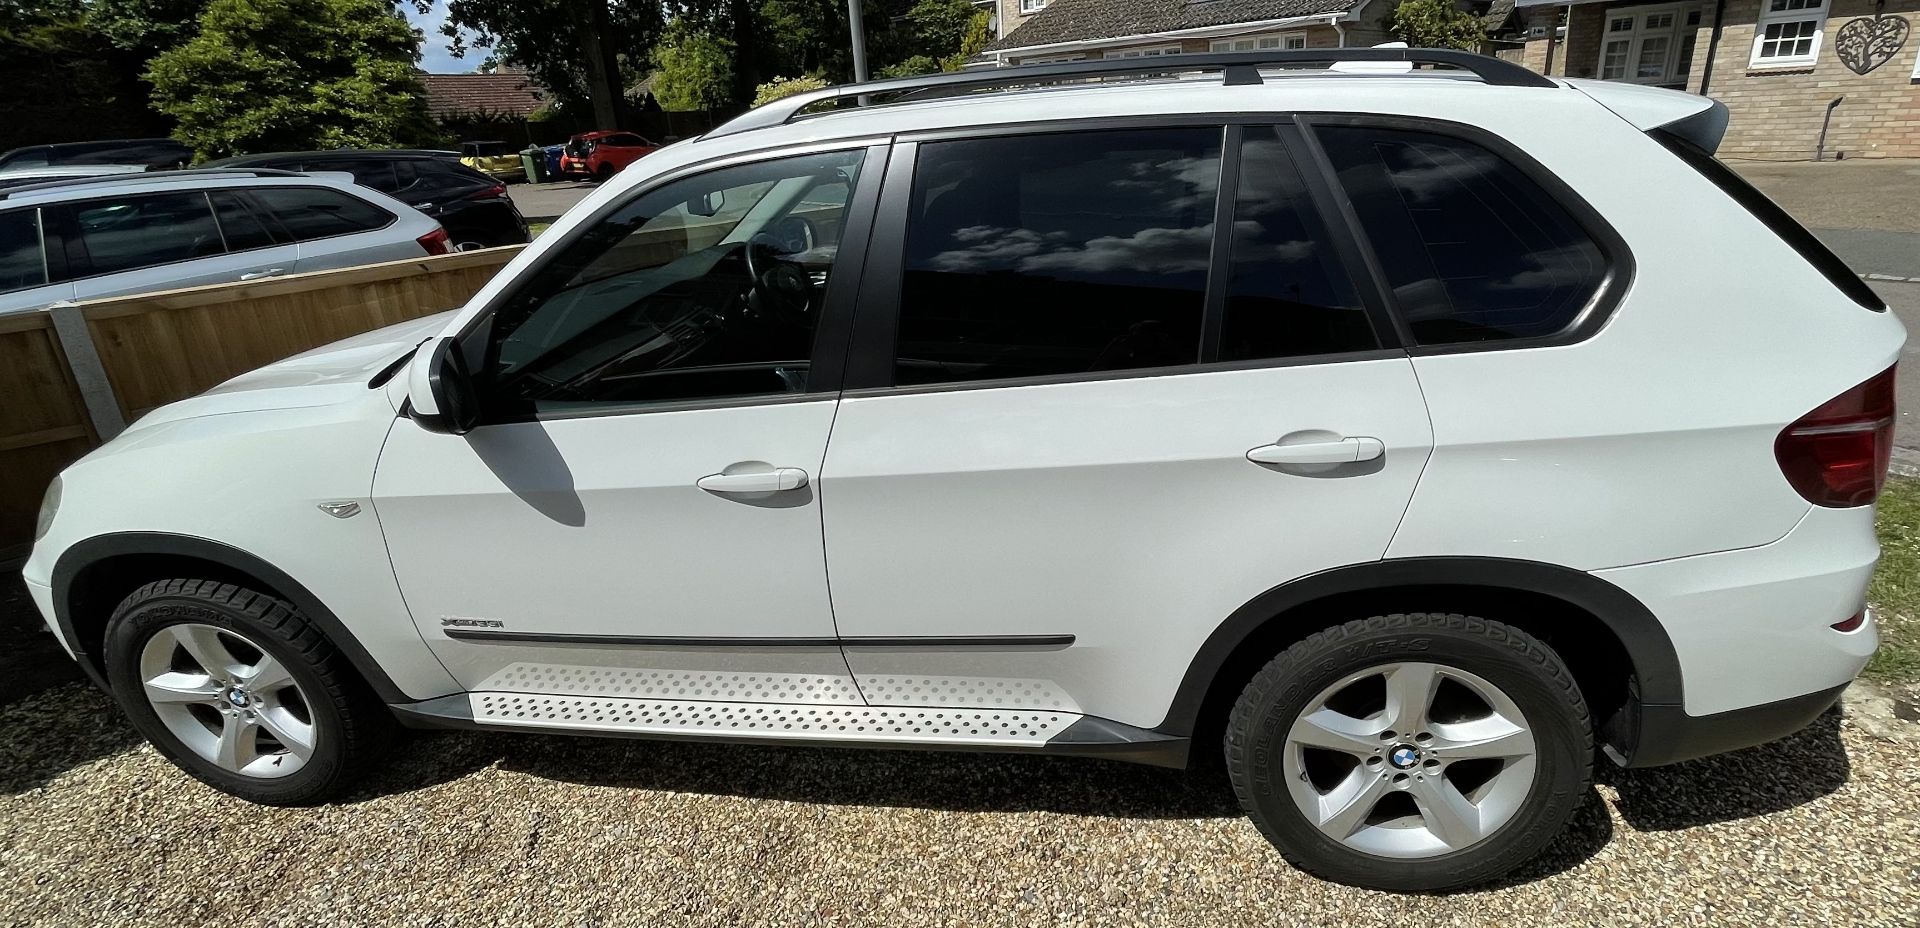 2010 BMW X5 Xdrive 35i - Petrol ULEZ complient. 3.0 Litre twin turbo. Low mileage. Leather interior - Image 5 of 21